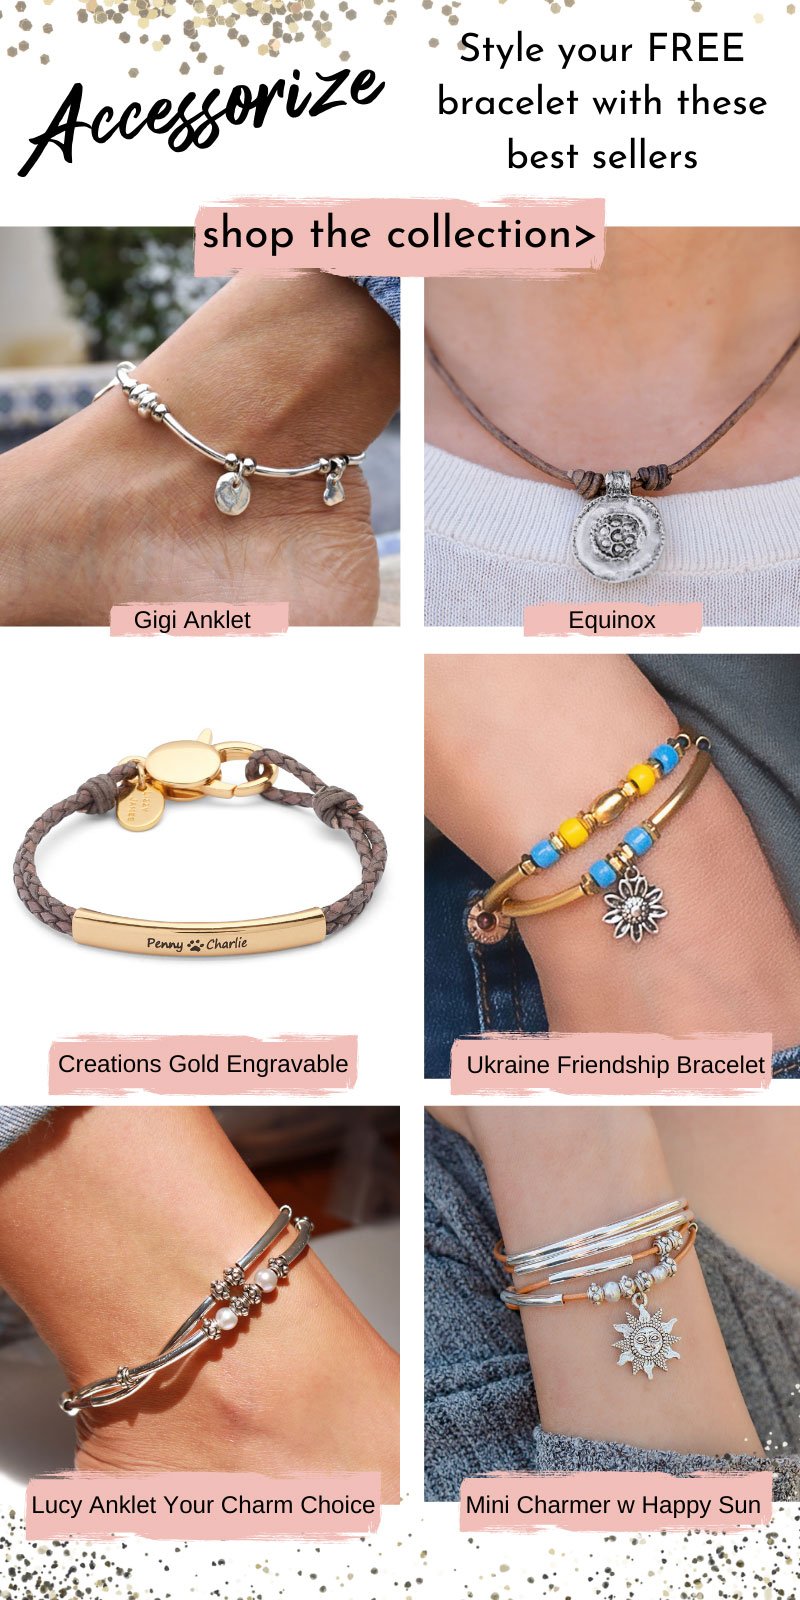 add accessories to the free bracelet